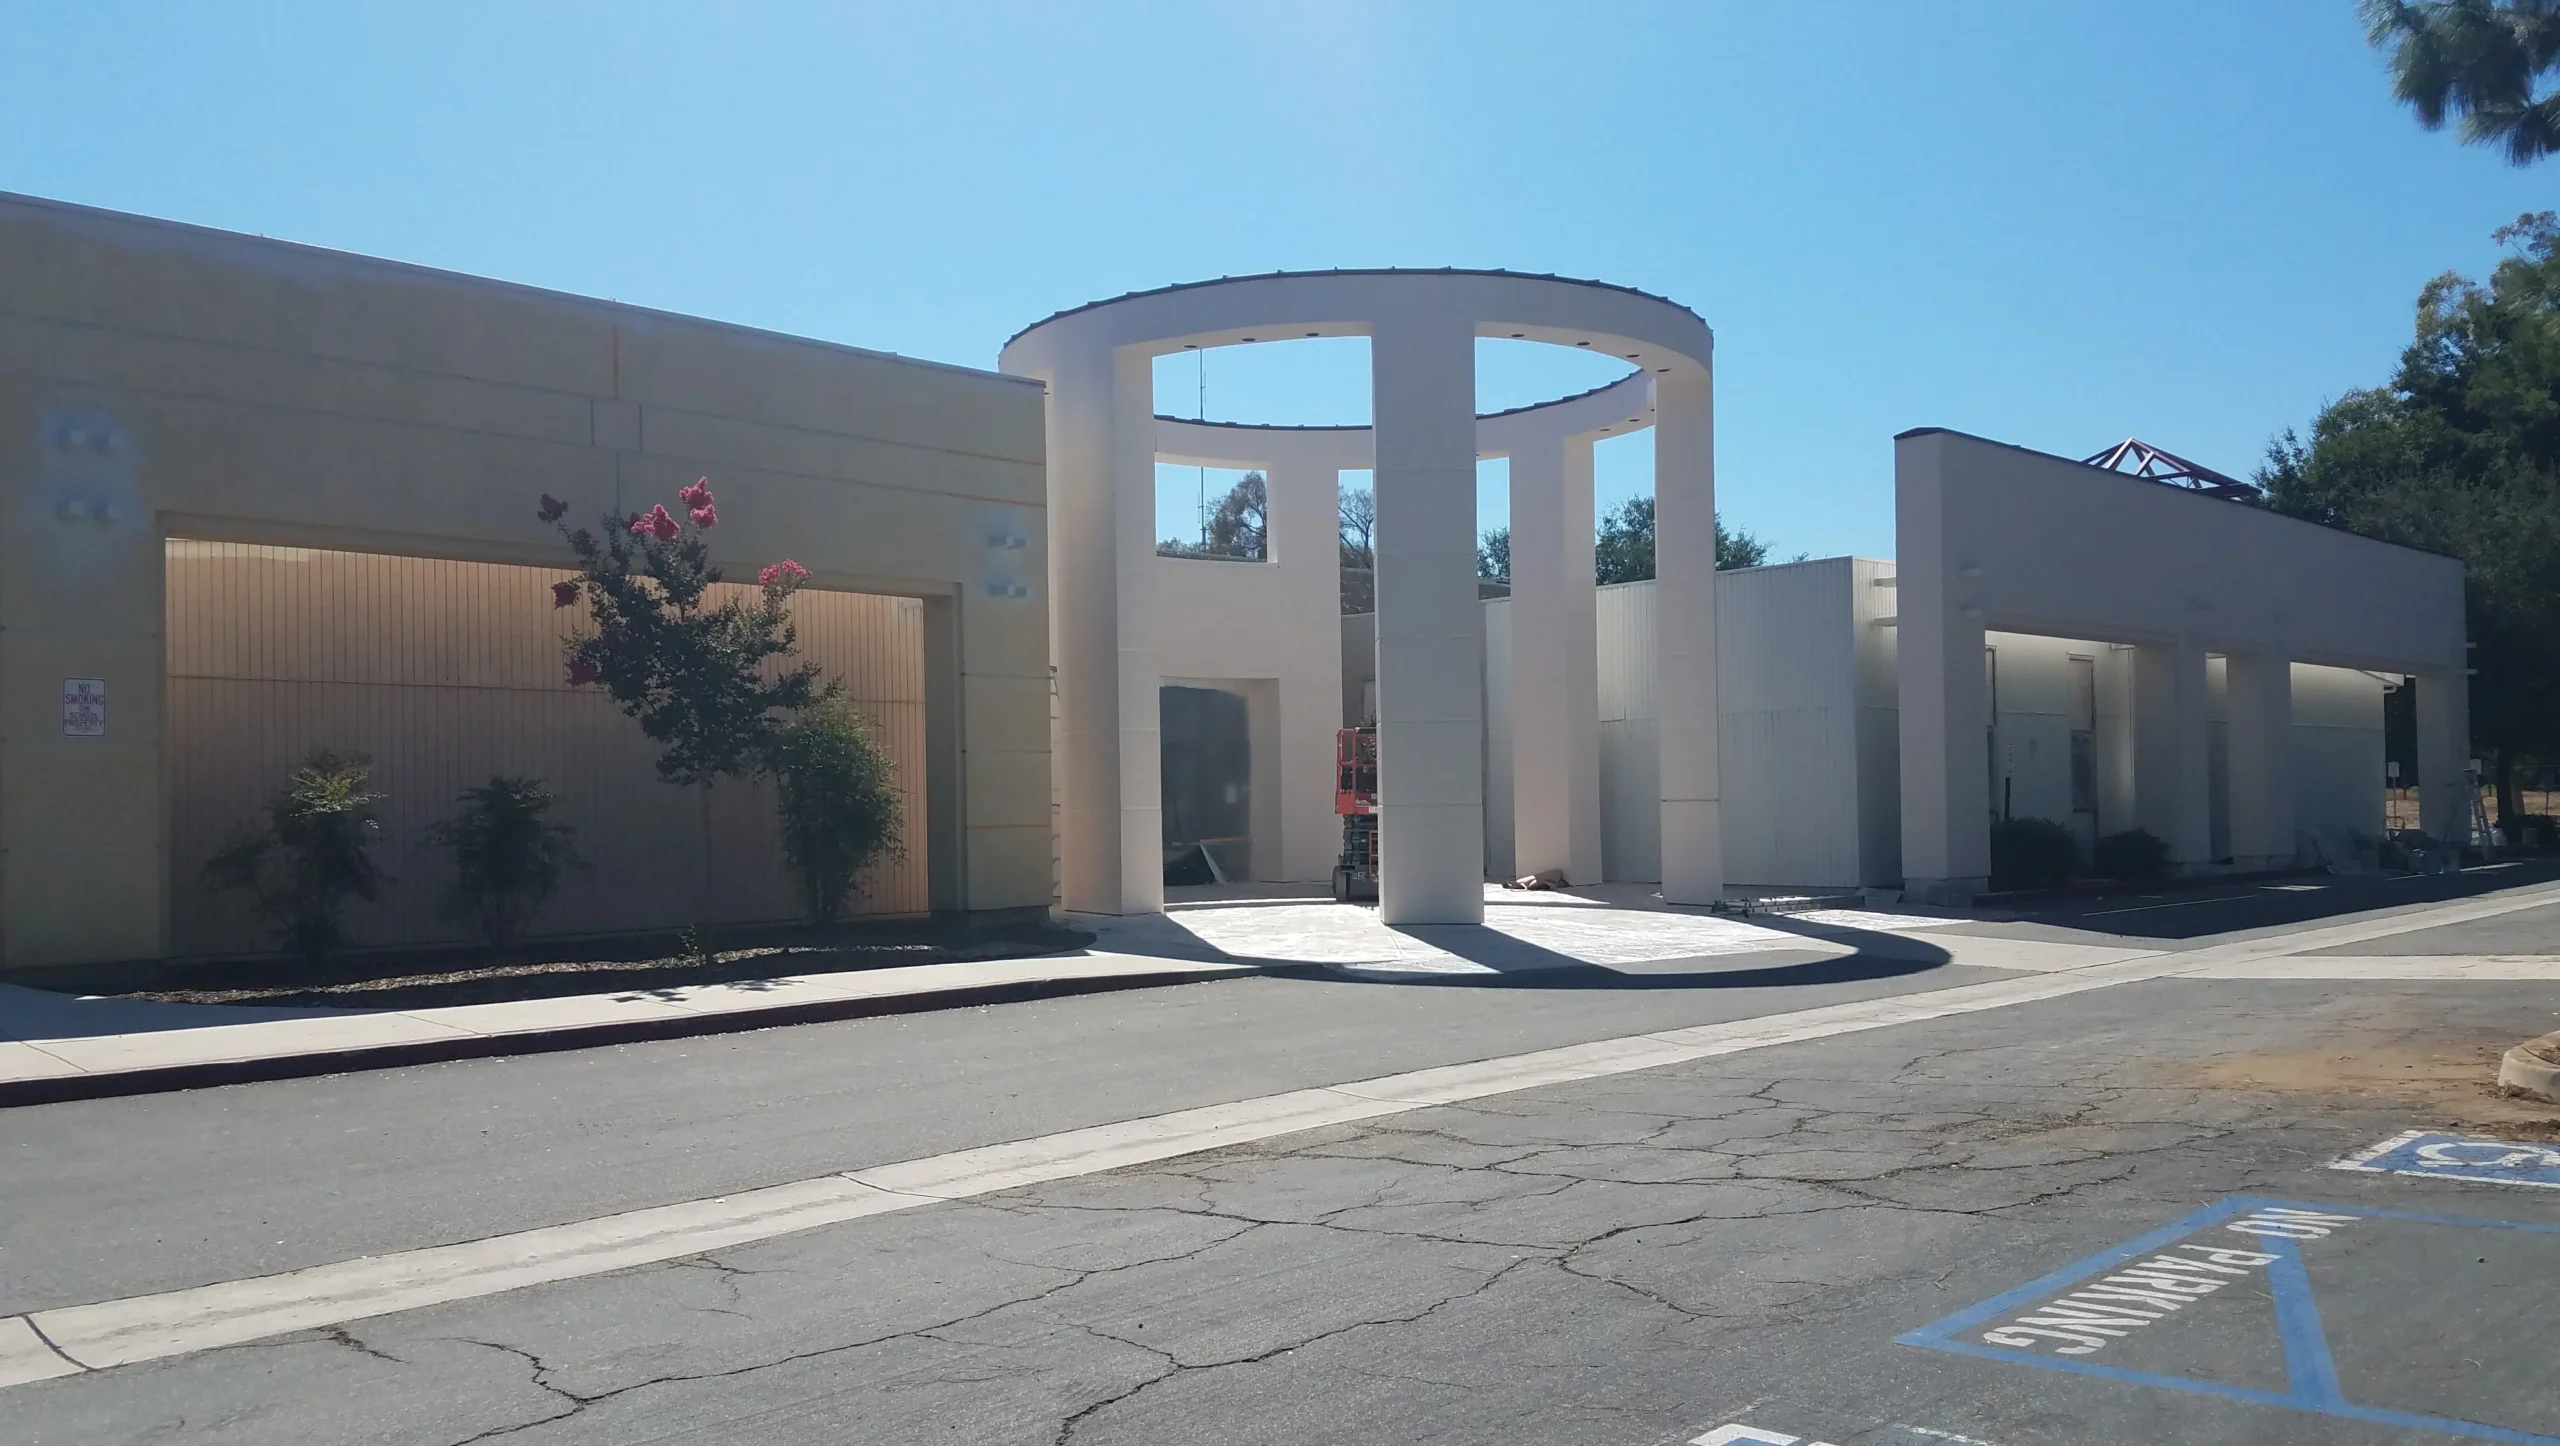 Conejo Valley High School entrance from the outside